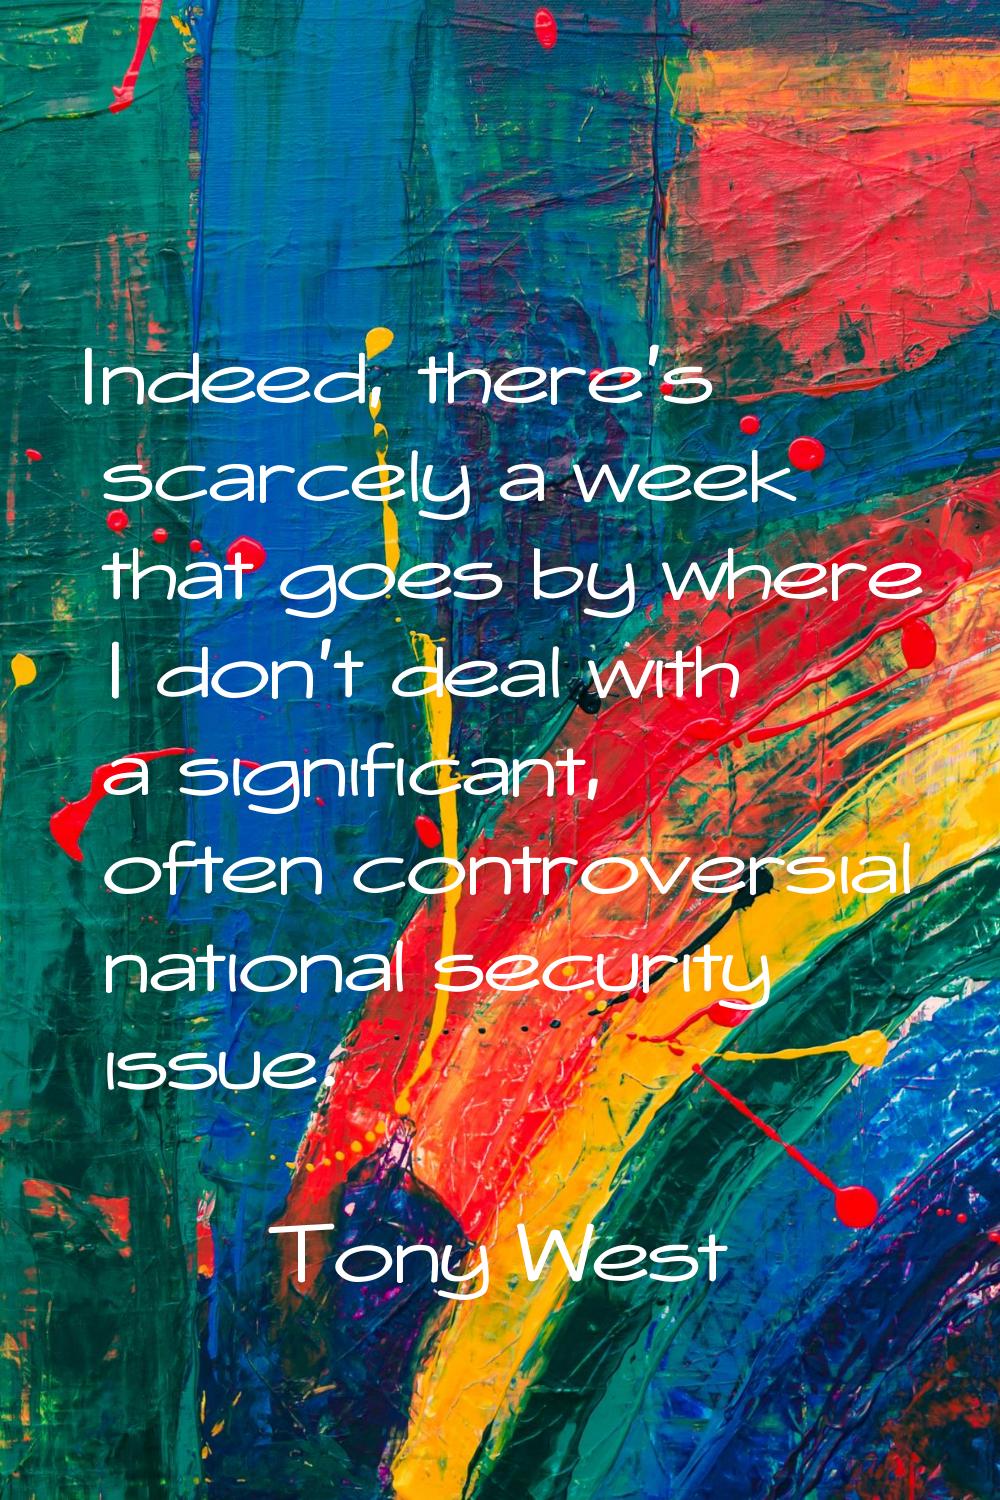 Indeed, there's scarcely a week that goes by where I don't deal with a significant, often controver